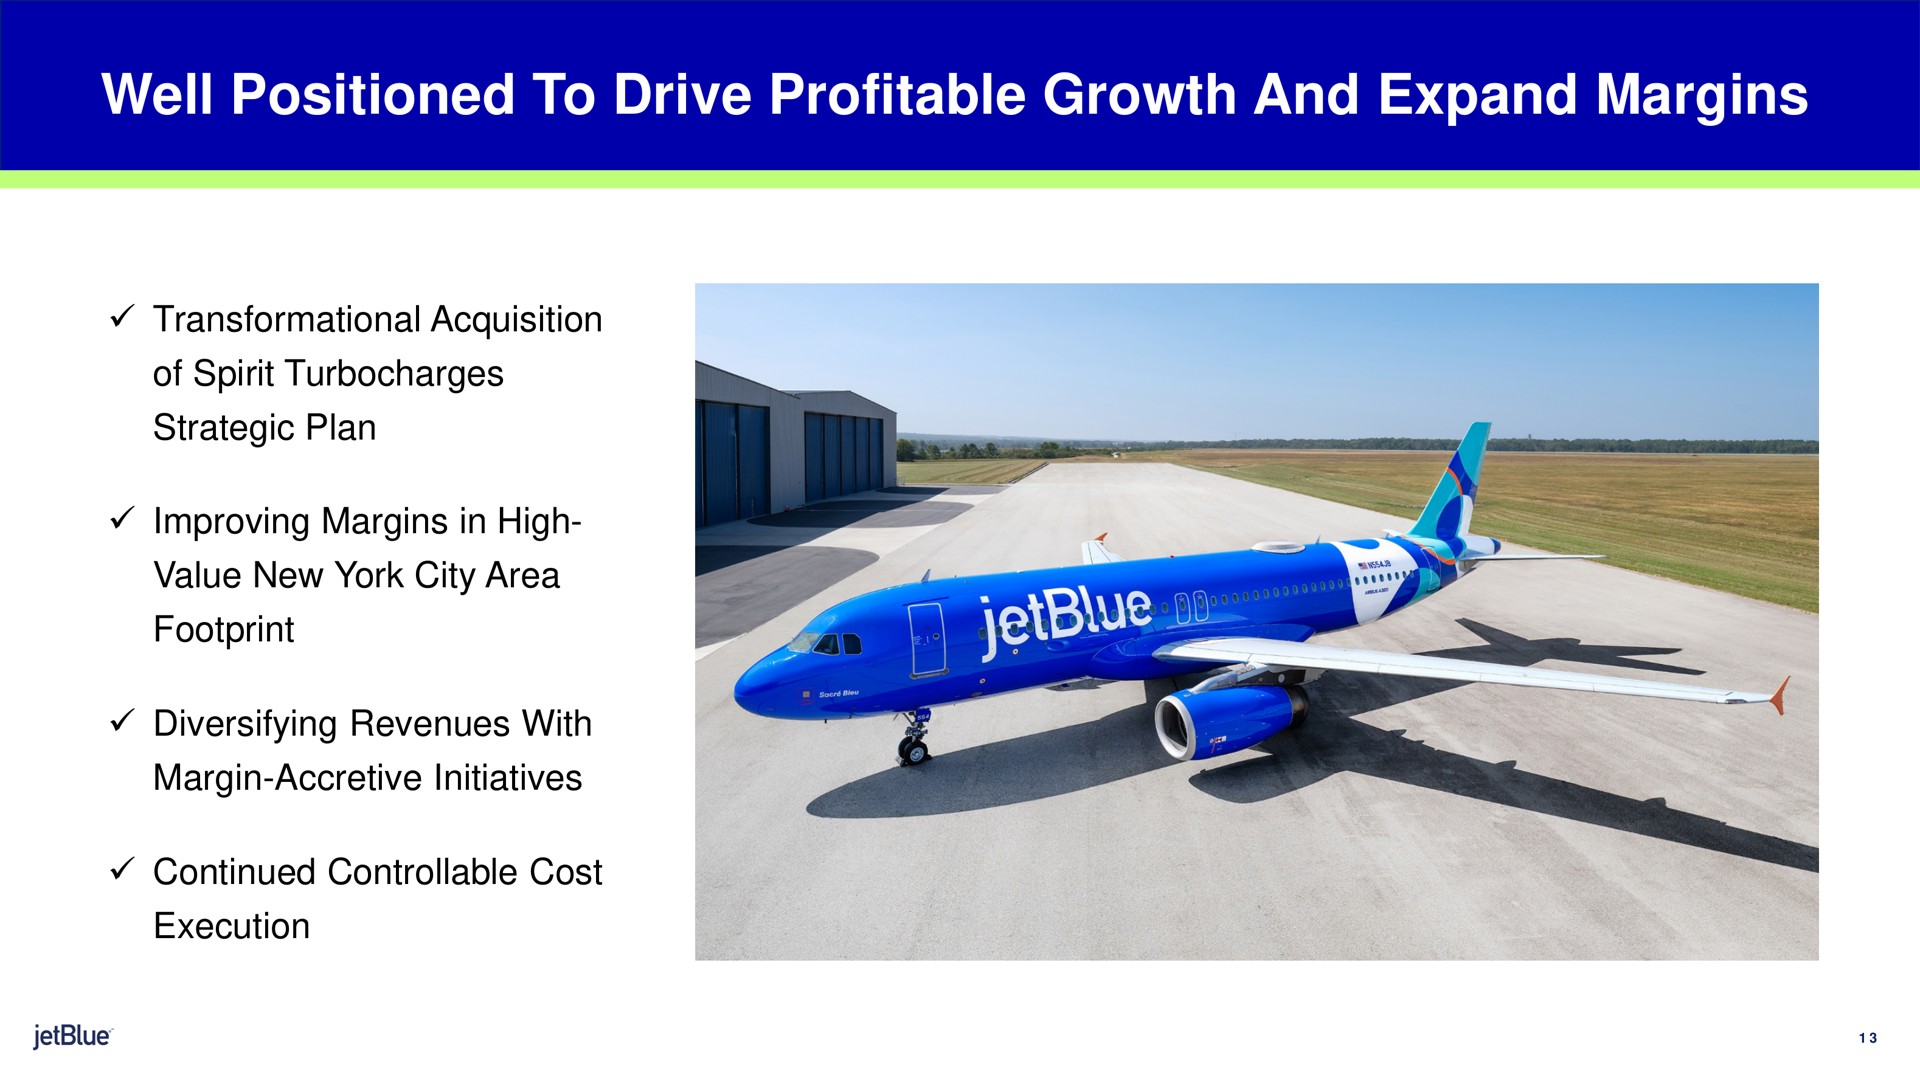 well positioned to drive profitable growth and expand margins acquisition of spirit strategic plan improving margins in high value new york city area footprint diversifying revenues with margin accretive initiatives continued controllable cost execution | jetBlue